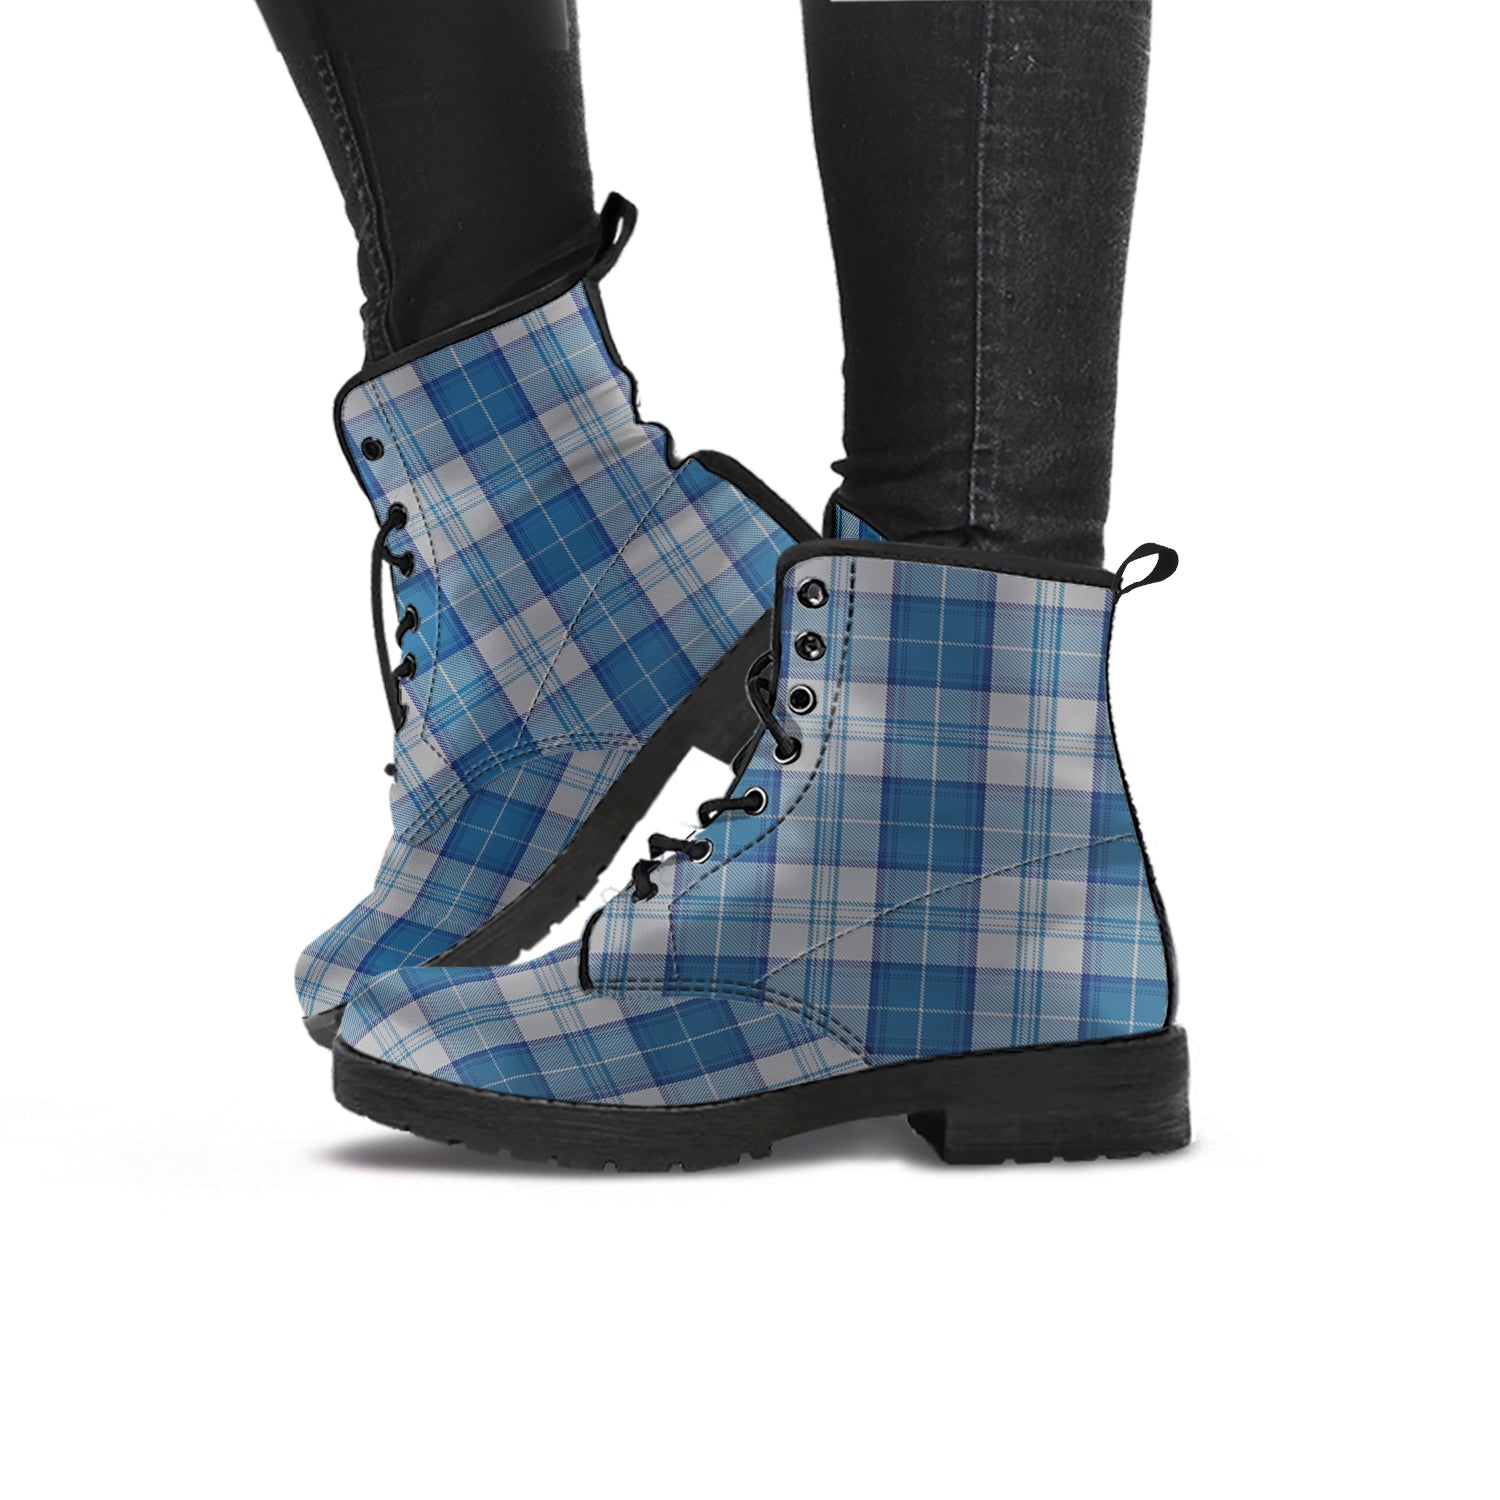 menzies-dress-blue-and-white-tartan-leather-boots